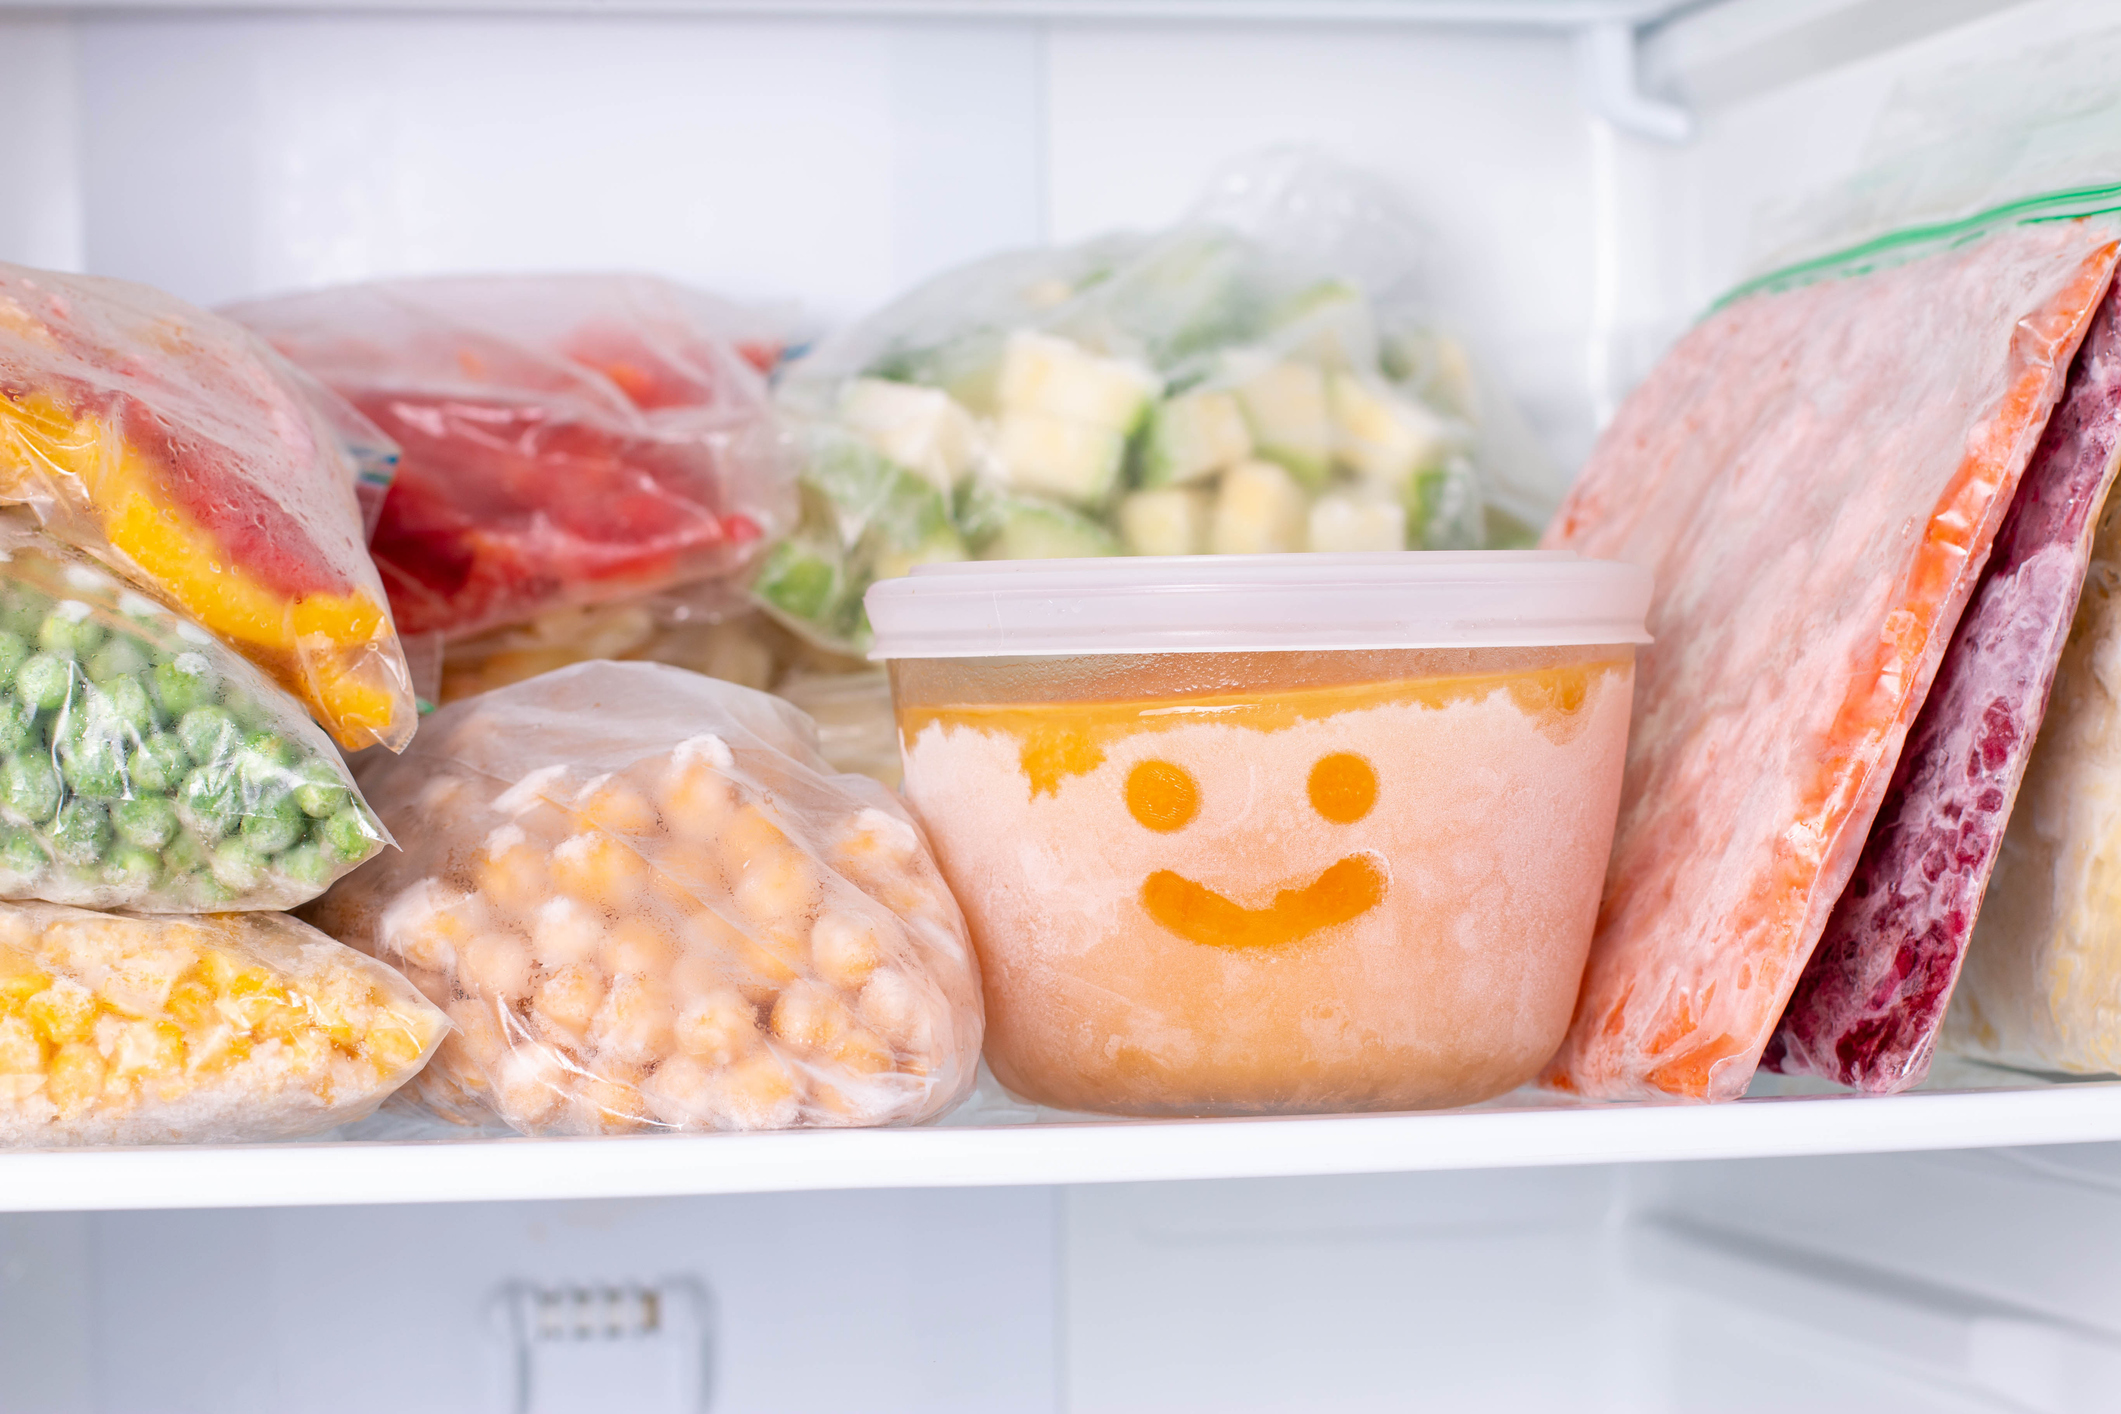 How To Deal with a Non-Responsive Freezer Compartment